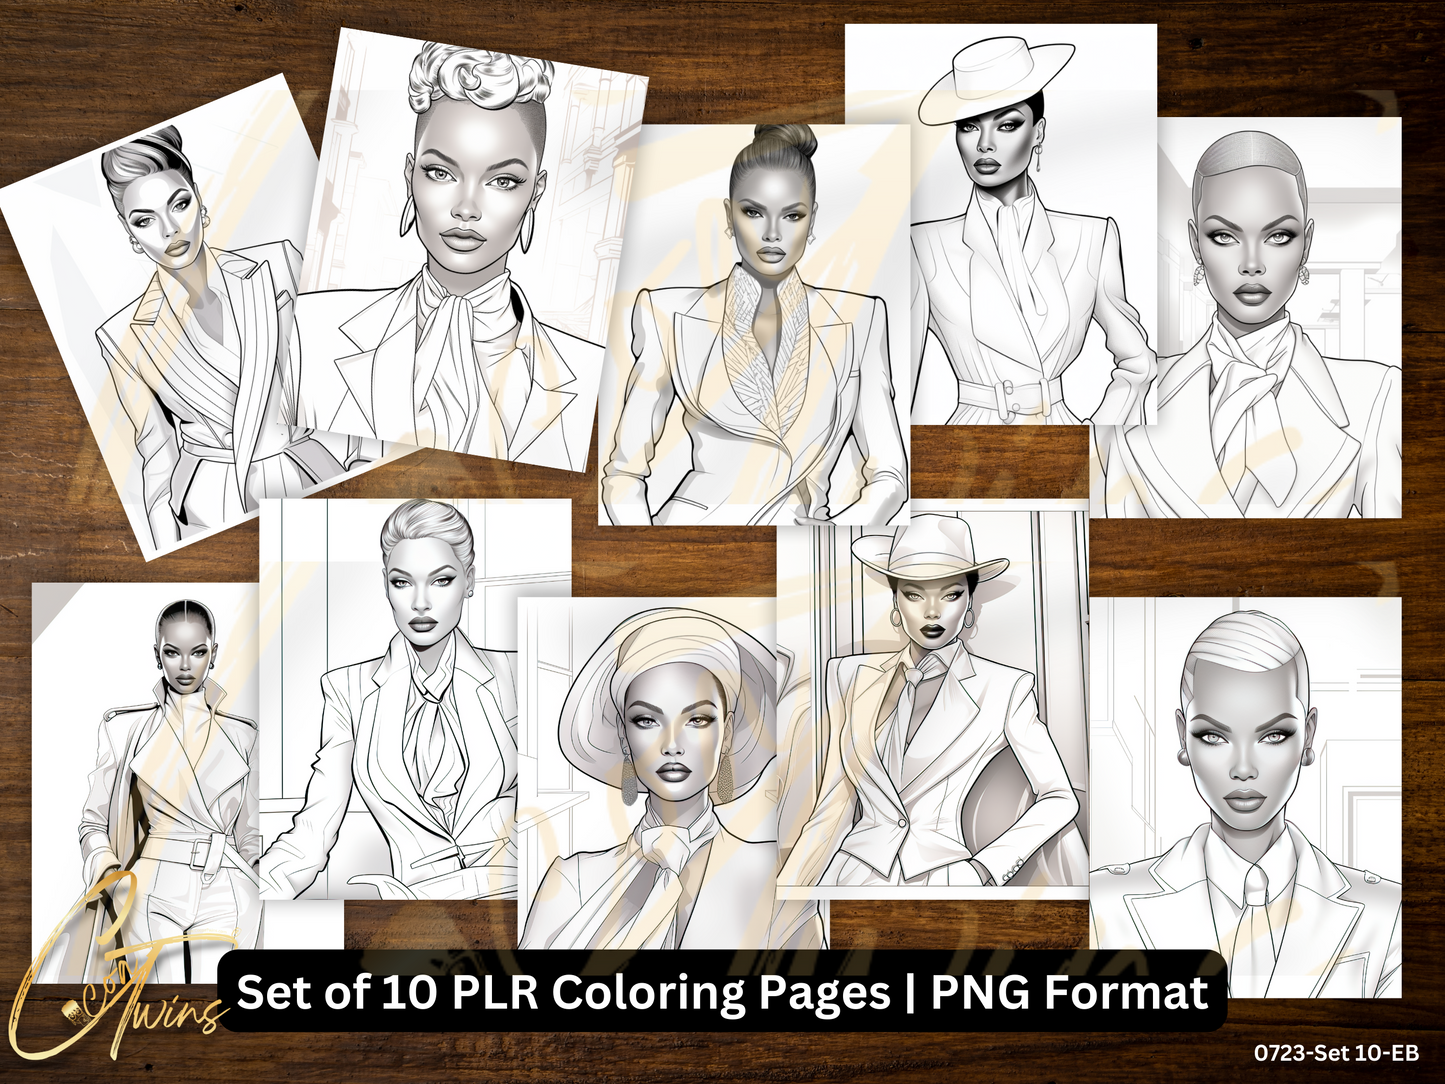 Limited Edition | PLR Coloring Pages | Set 10-EB (0723)